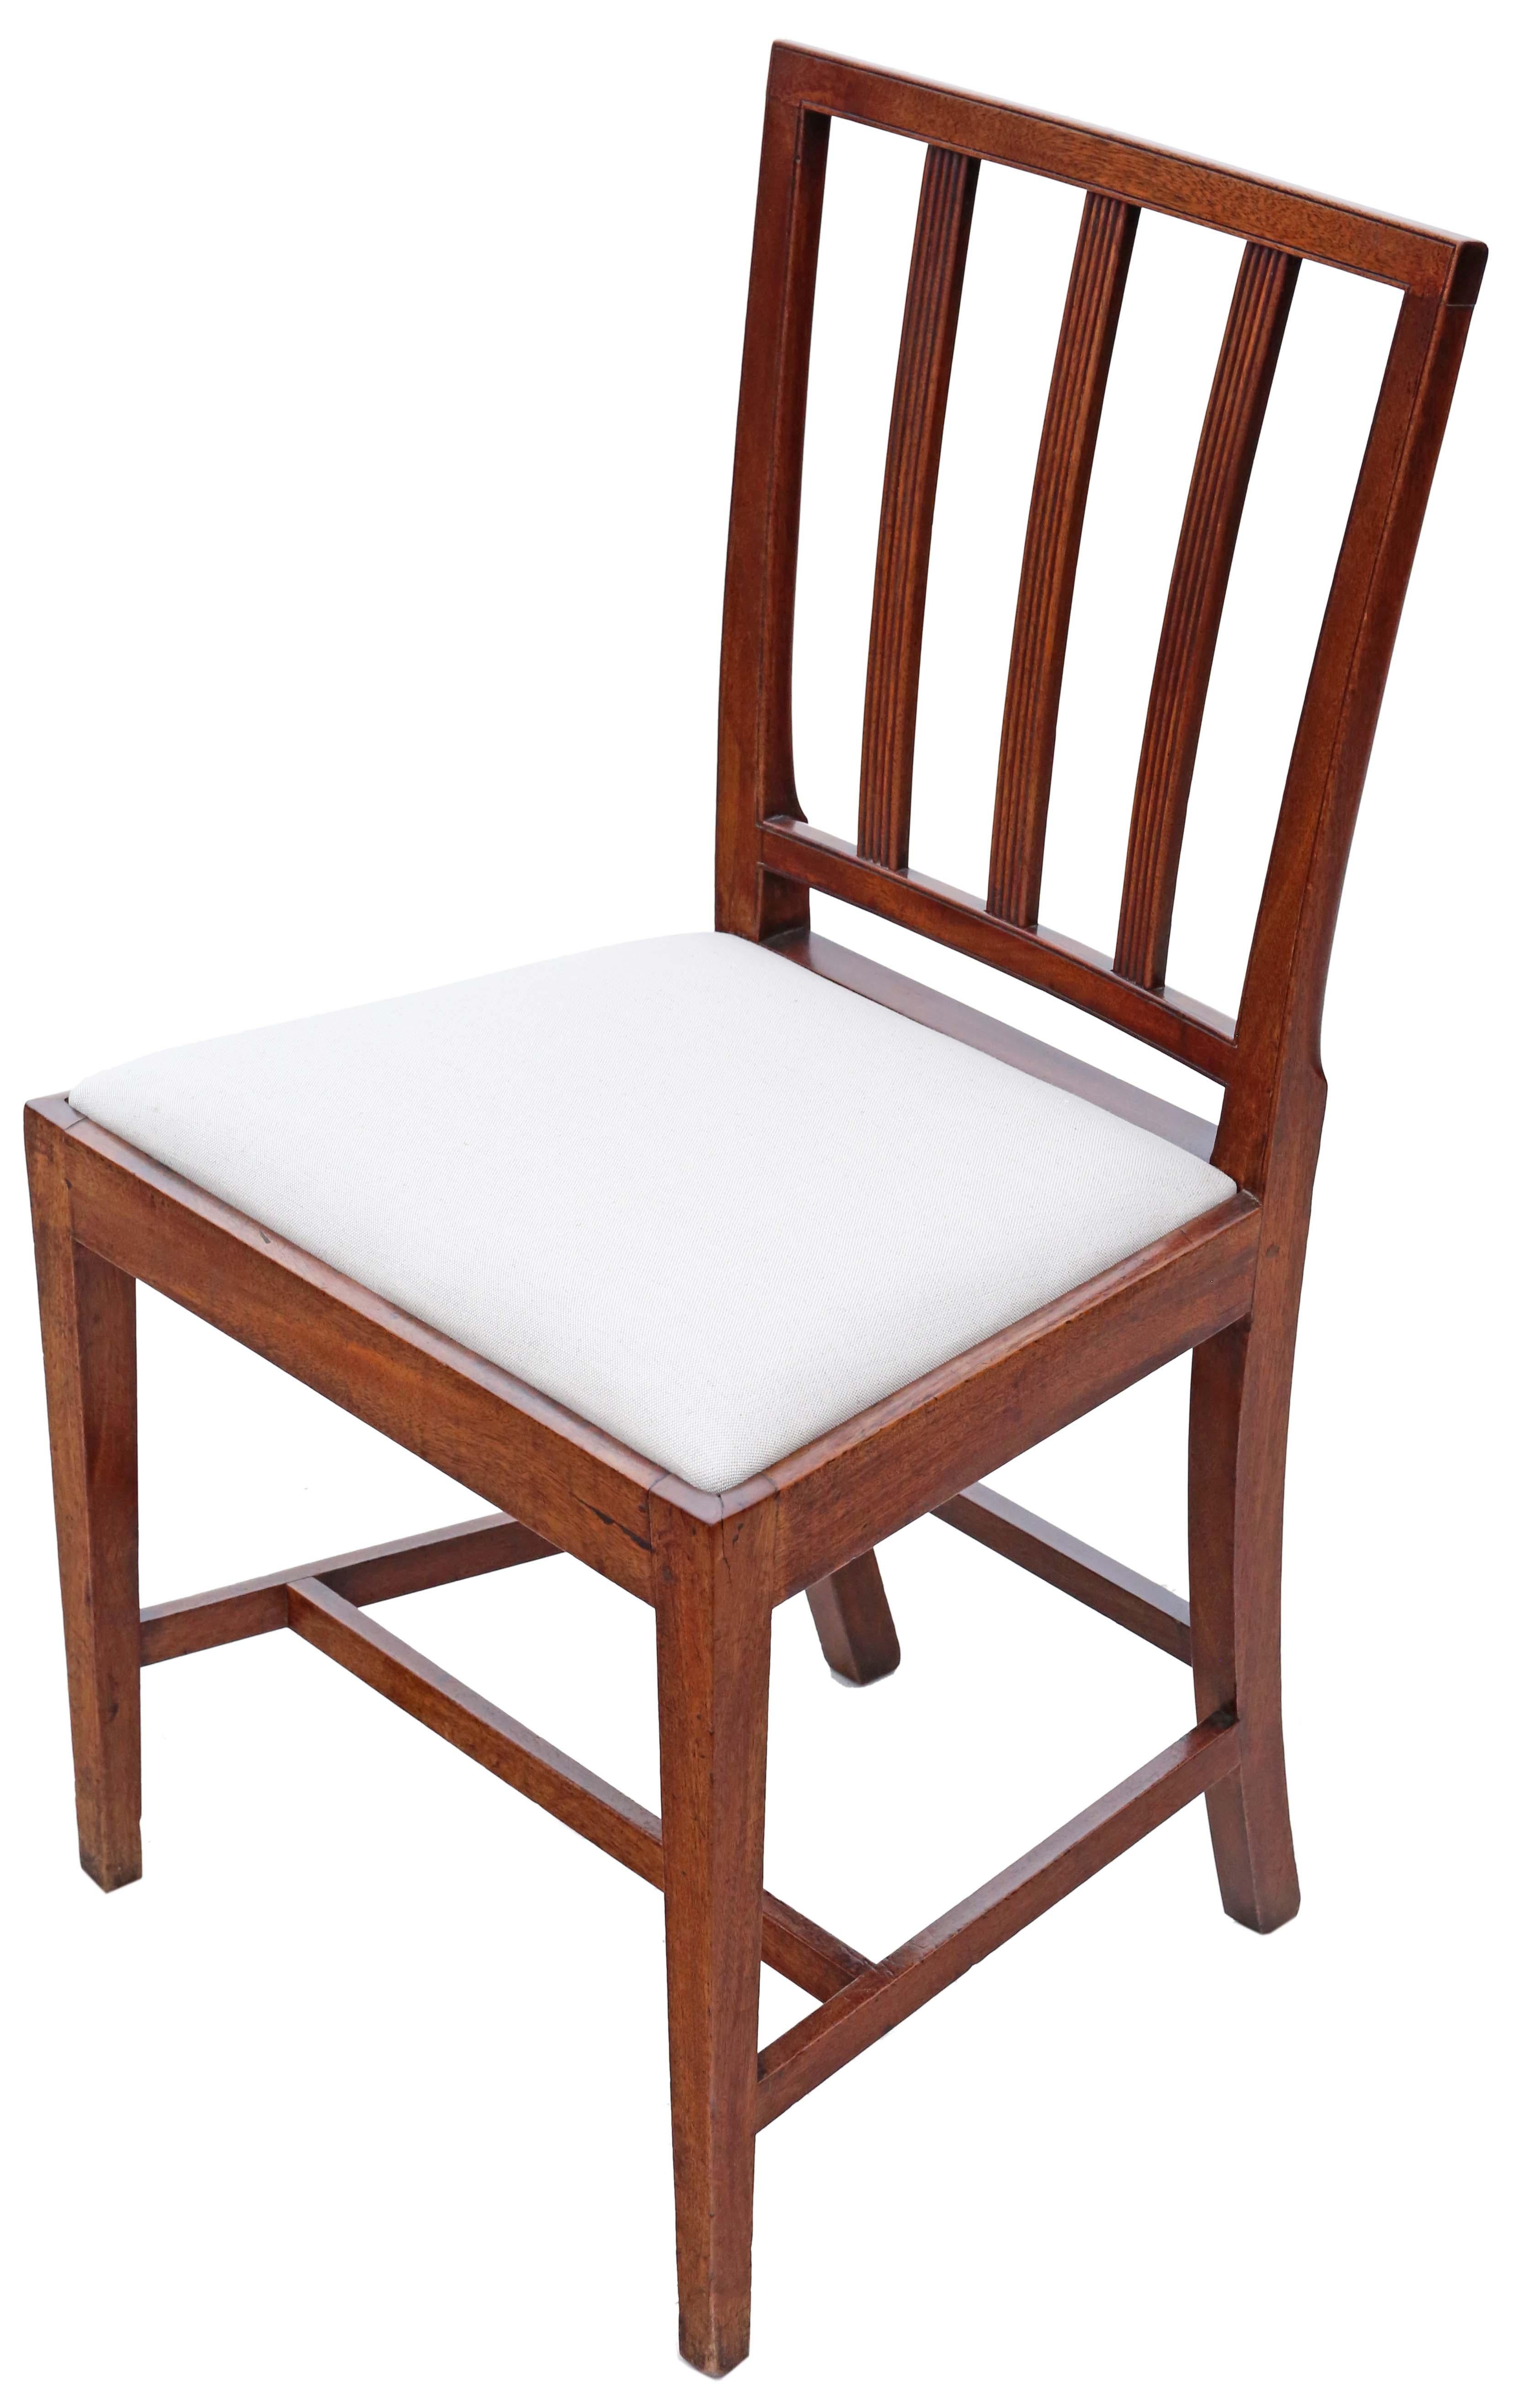 Regency Mahogany Dining Chairs: Set of 8 (6+2), Antique Quality, Early 19th C For Sale 2